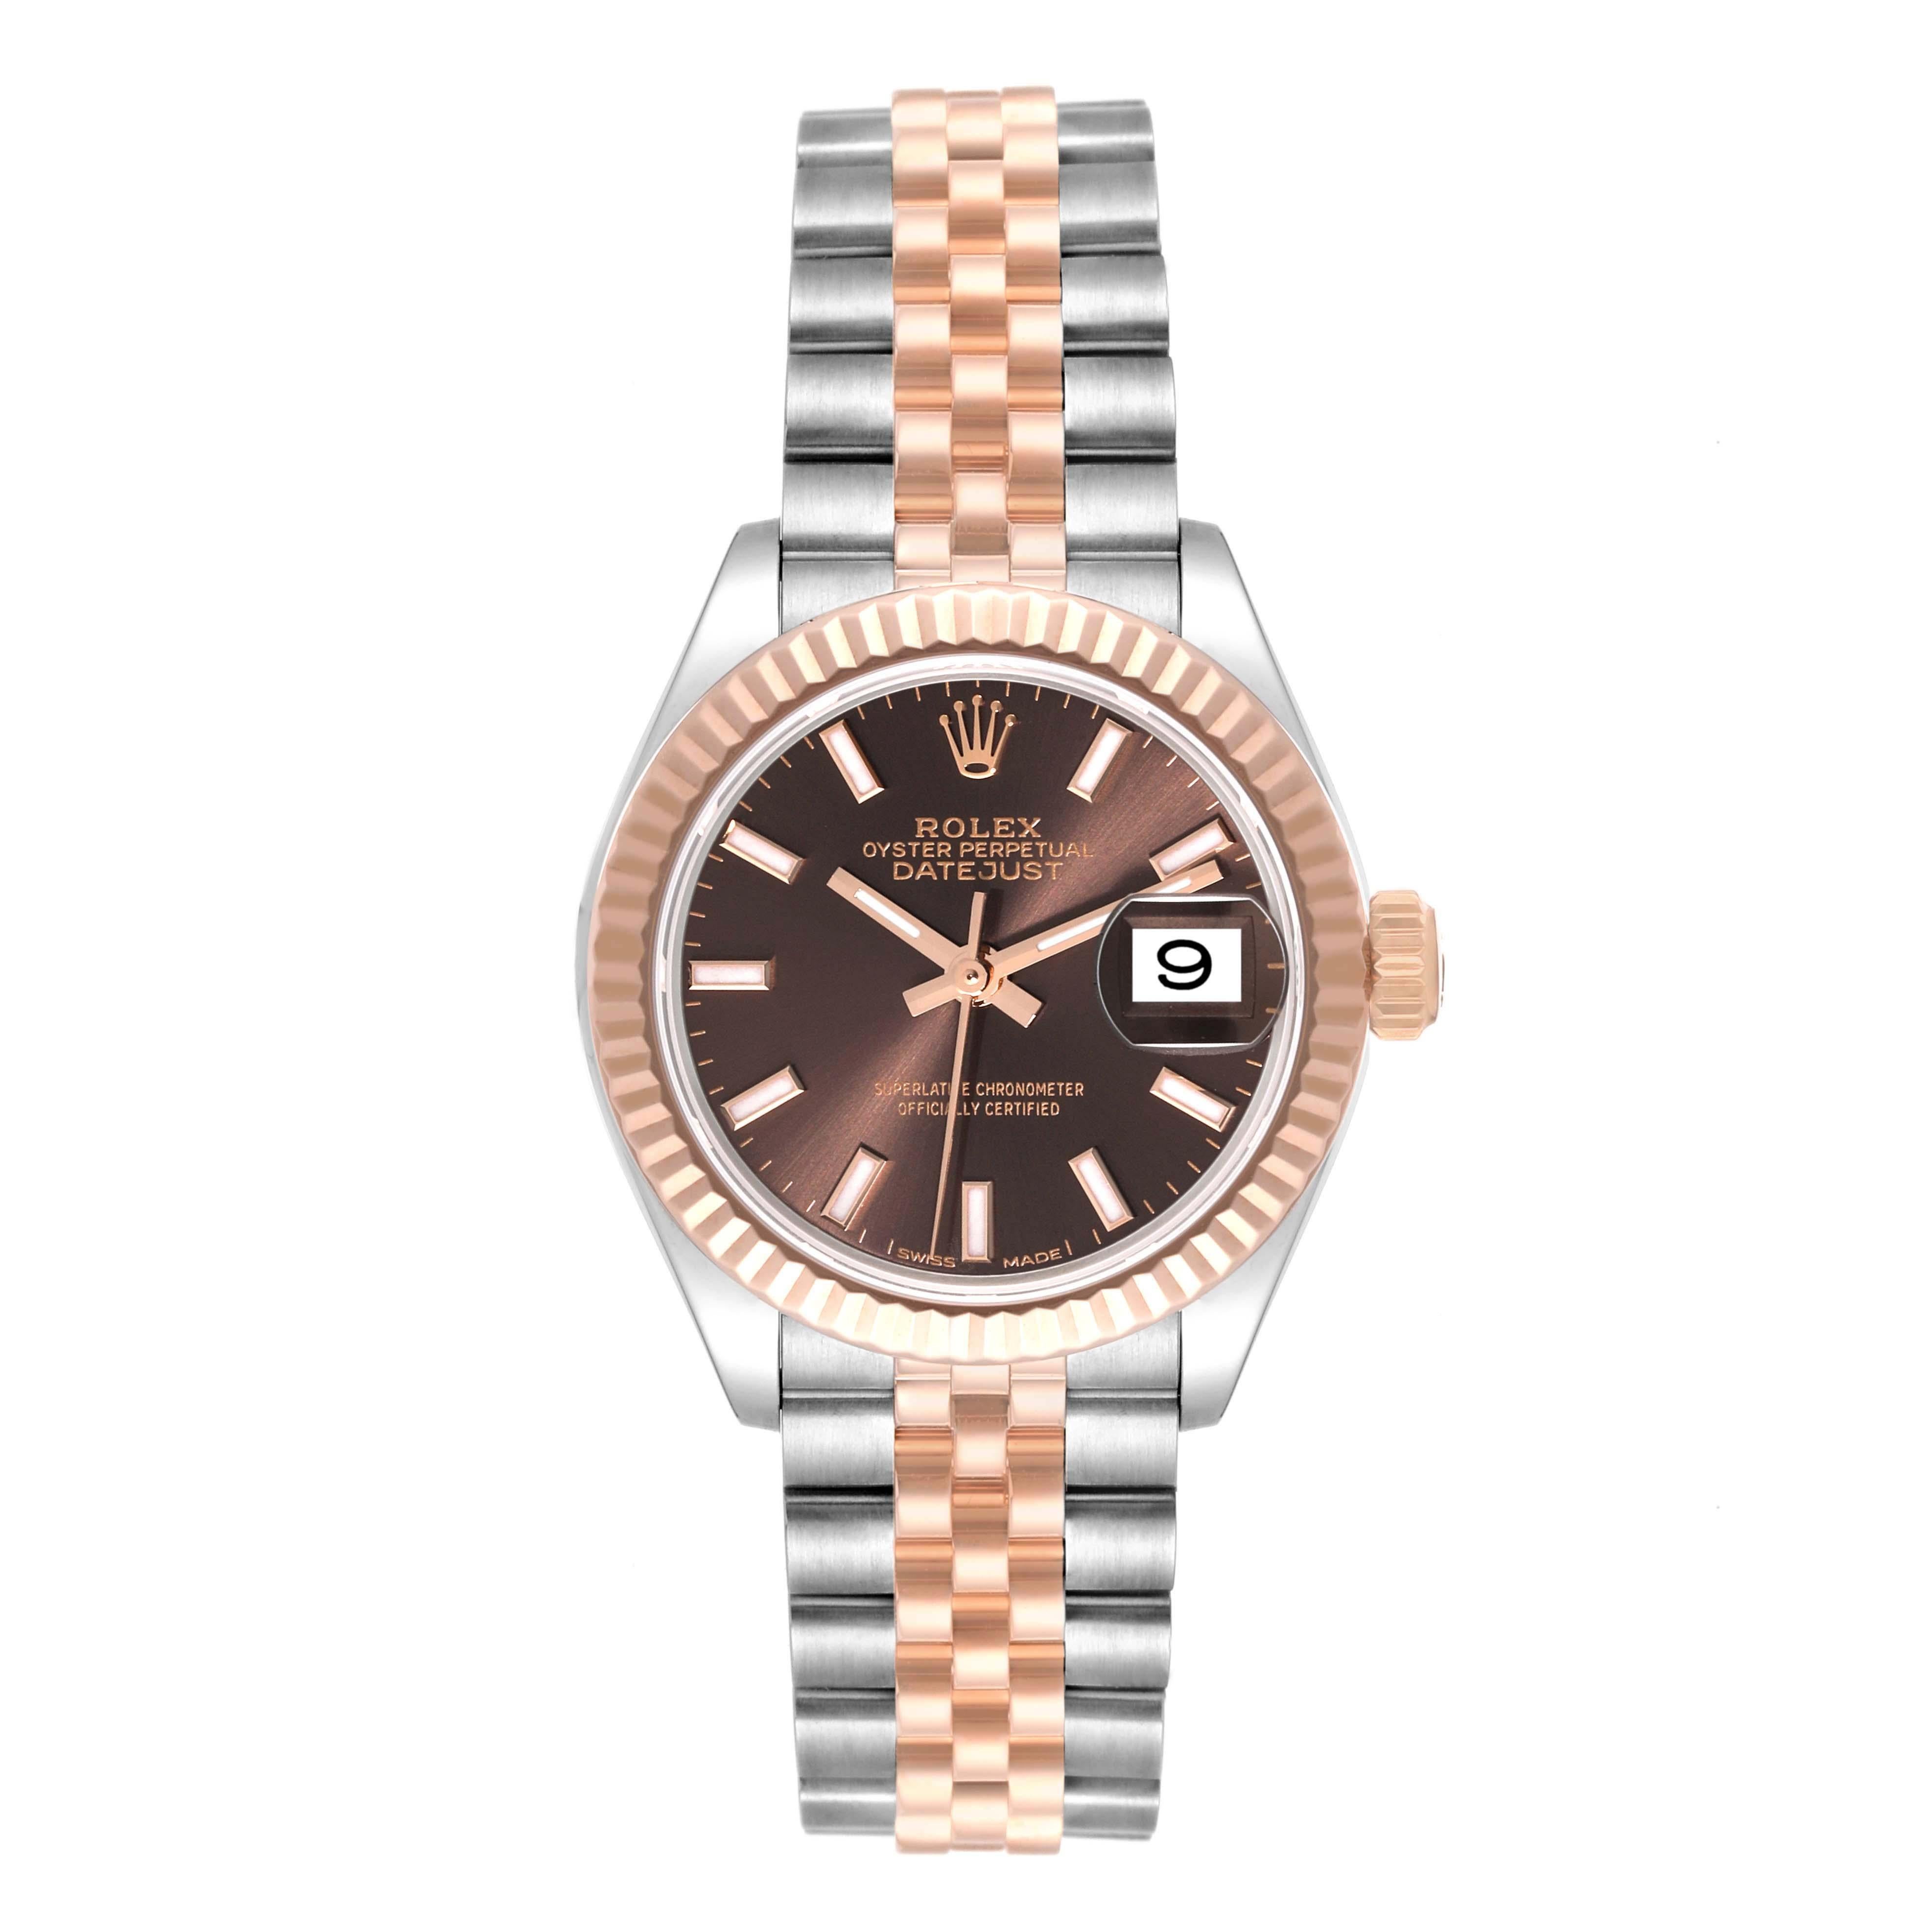 Rolex Datejust Chocolate Brown Dial Steel Rose Gold Ladies Watch 279171 Box Card. Officially certified chronometer automatic self-winding movement. Stainless steel oyster case 28 mm in diameter. Rolex logo on an 18K rose gold crown. 18k rose gold